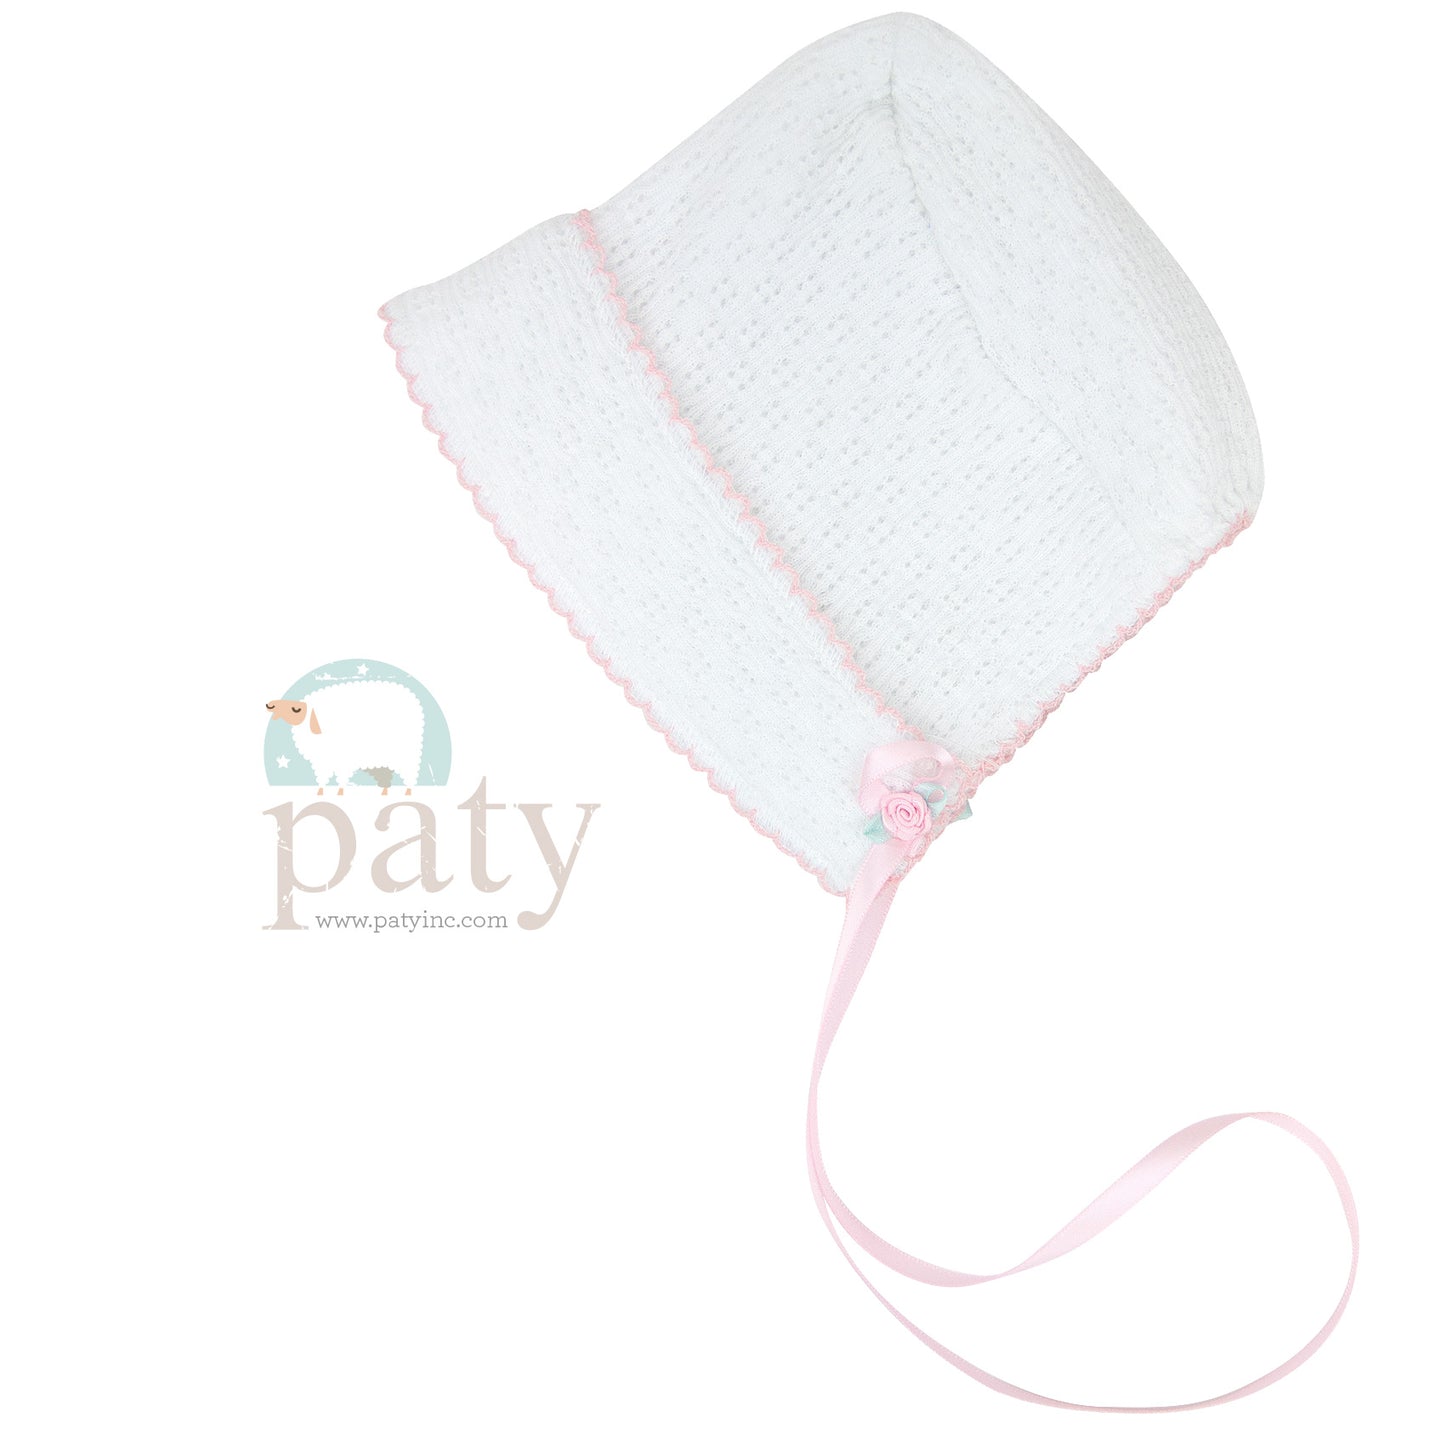 Paty Bonnet with Pink Rosette and Trim